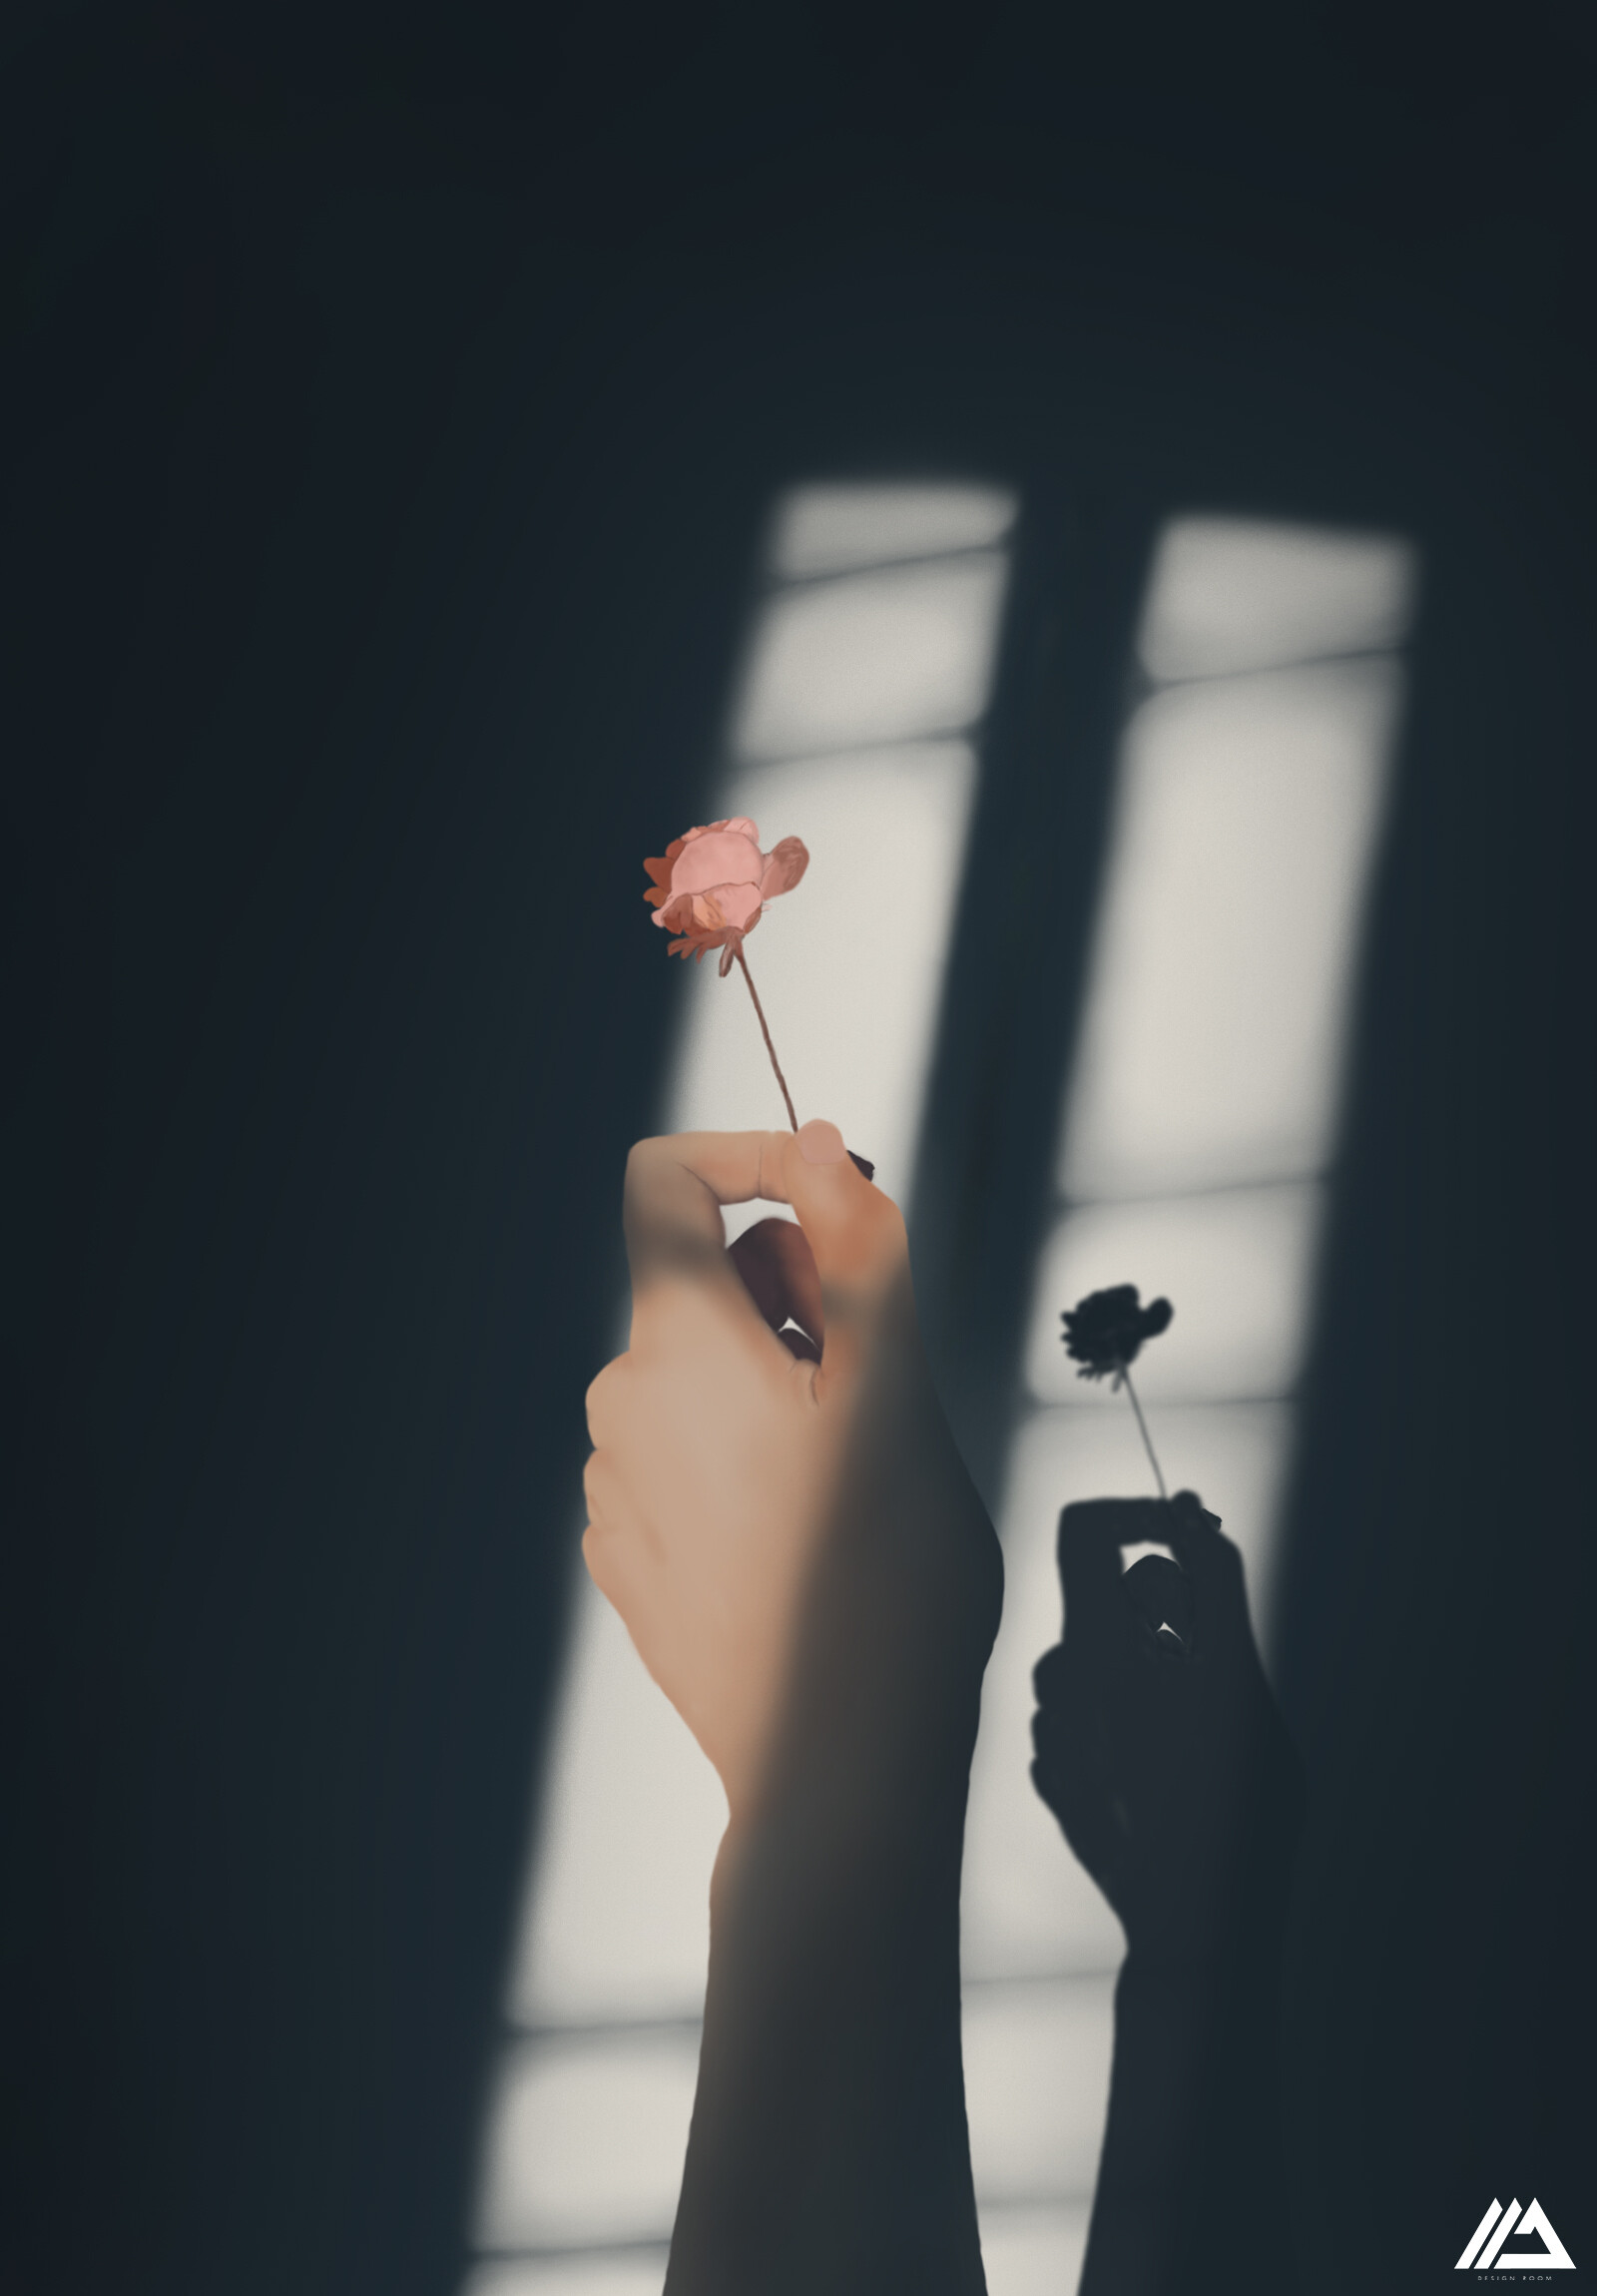 ArtStation - Aesthetic backgrounds hand pictures_Drawing